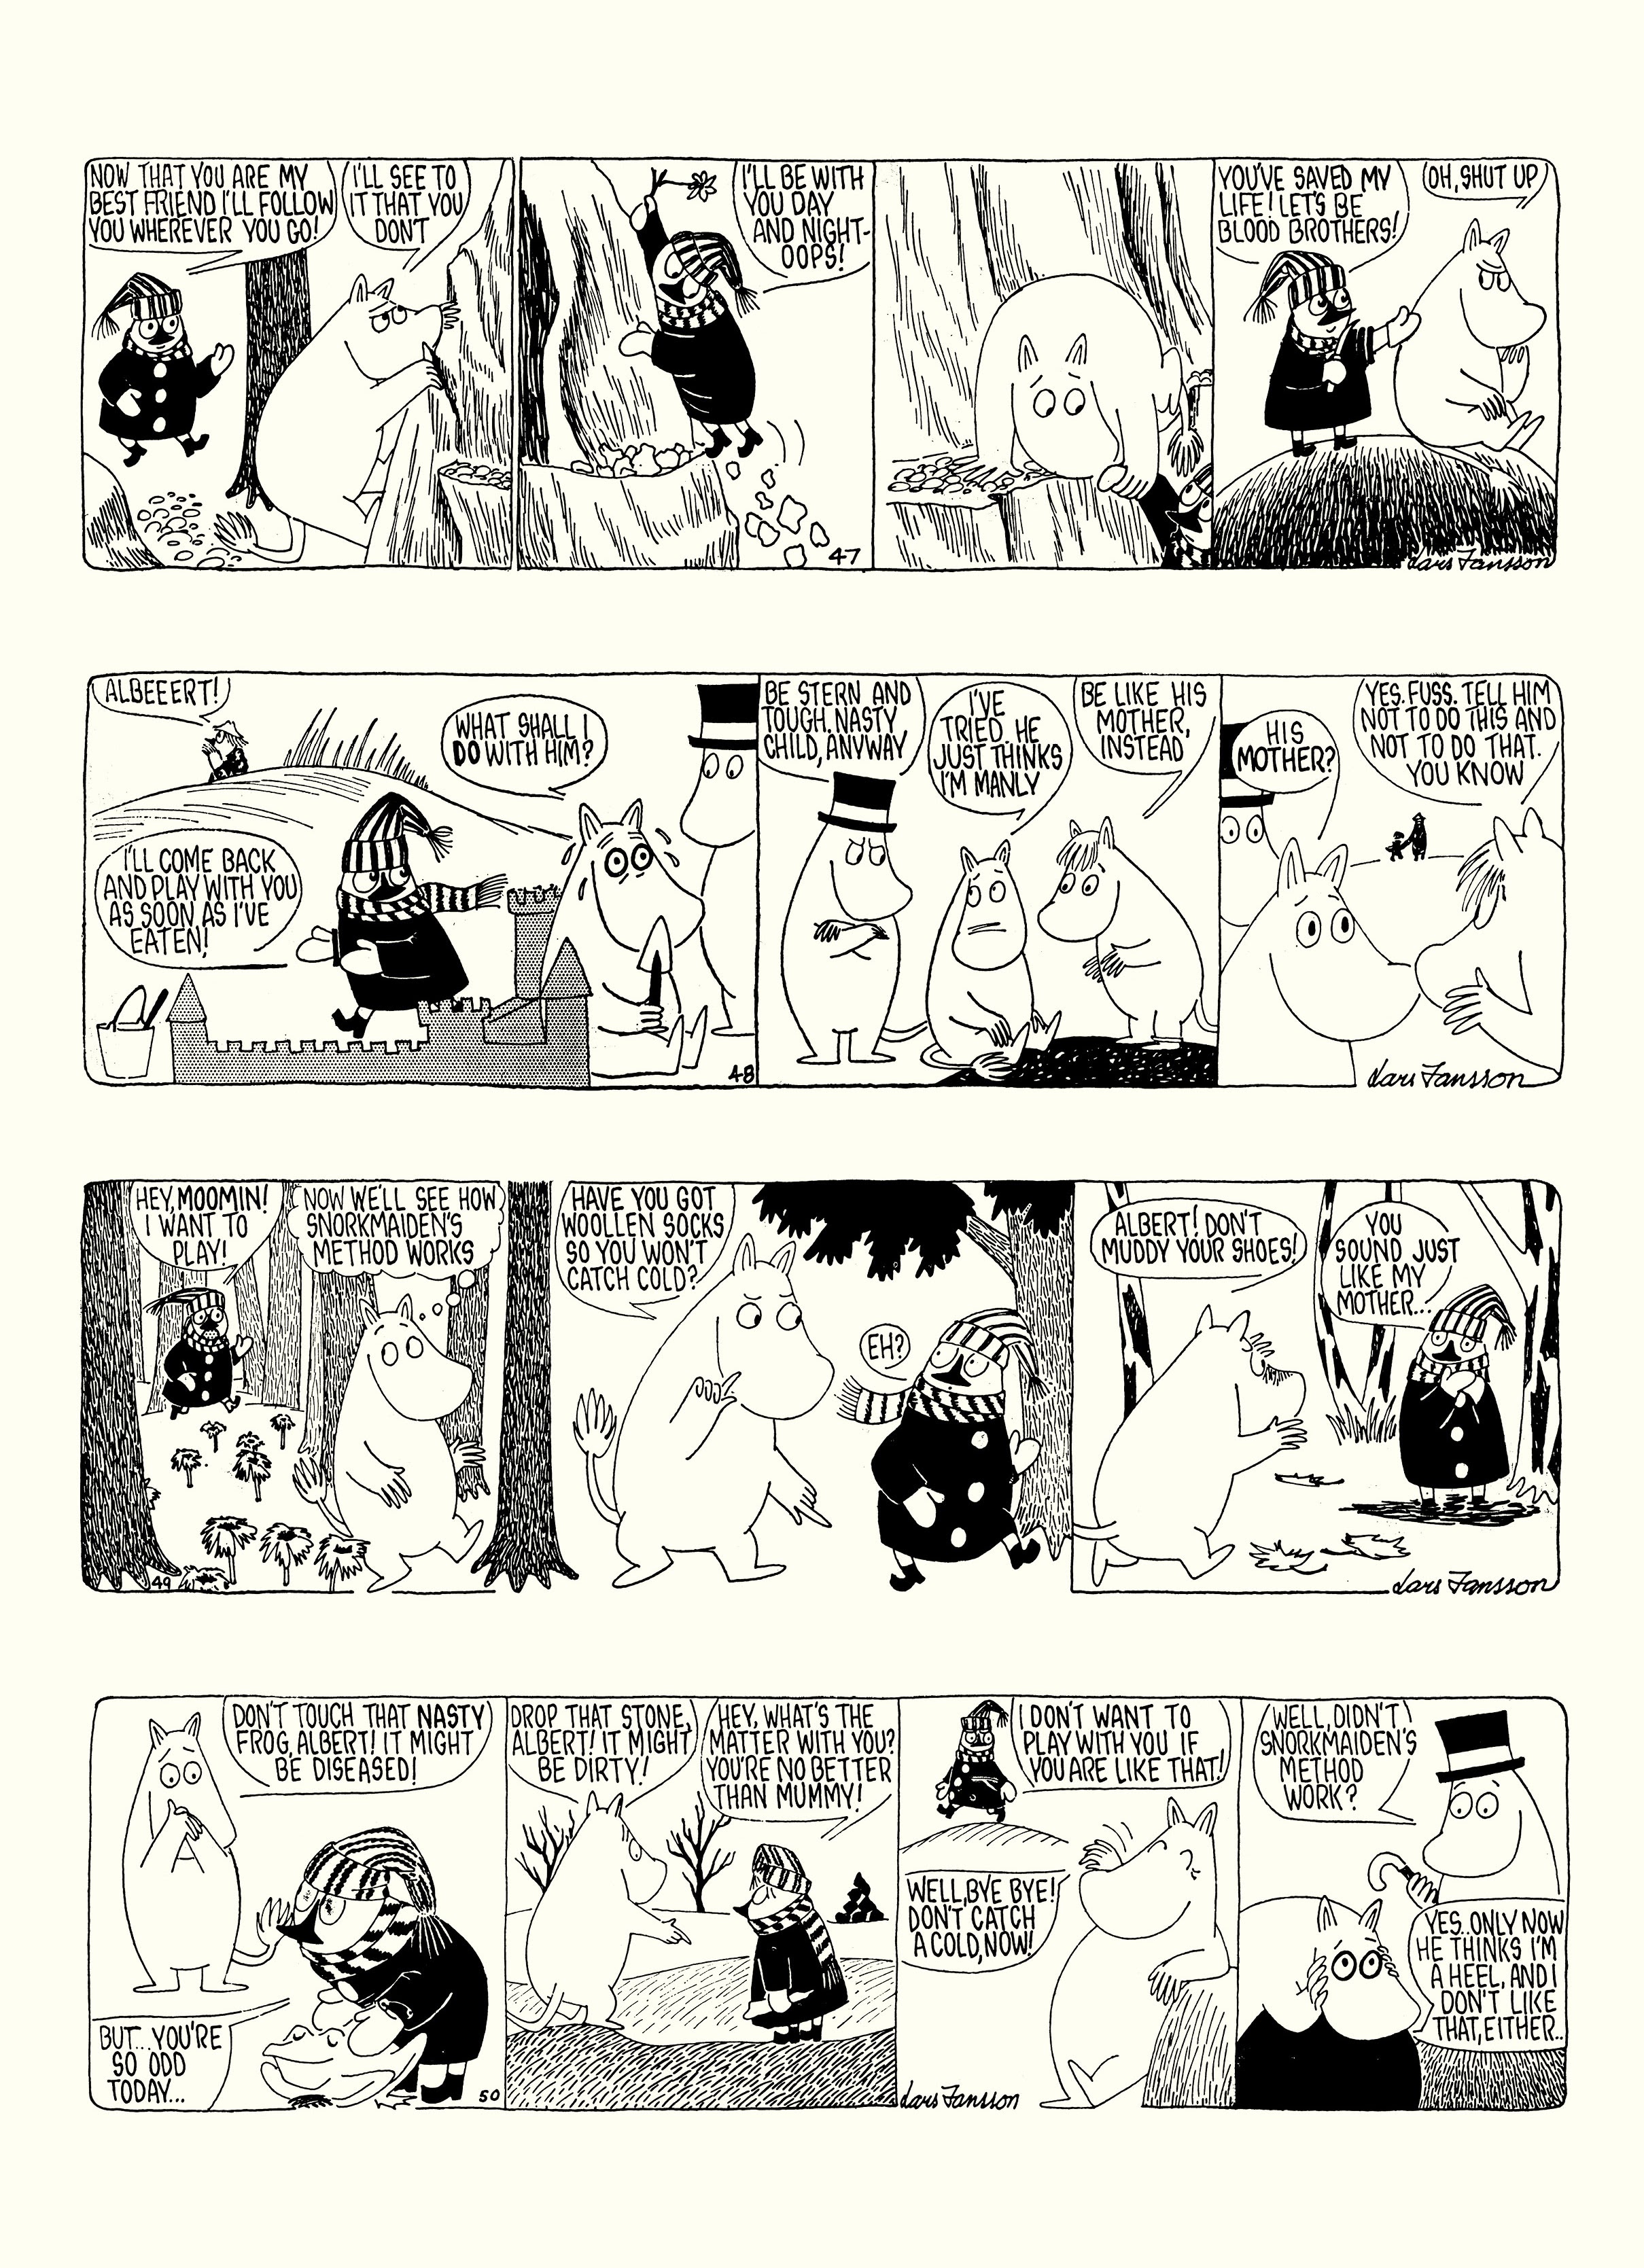 Read online Moomin: The Complete Lars Jansson Comic Strip comic -  Issue # TPB 8 - 63